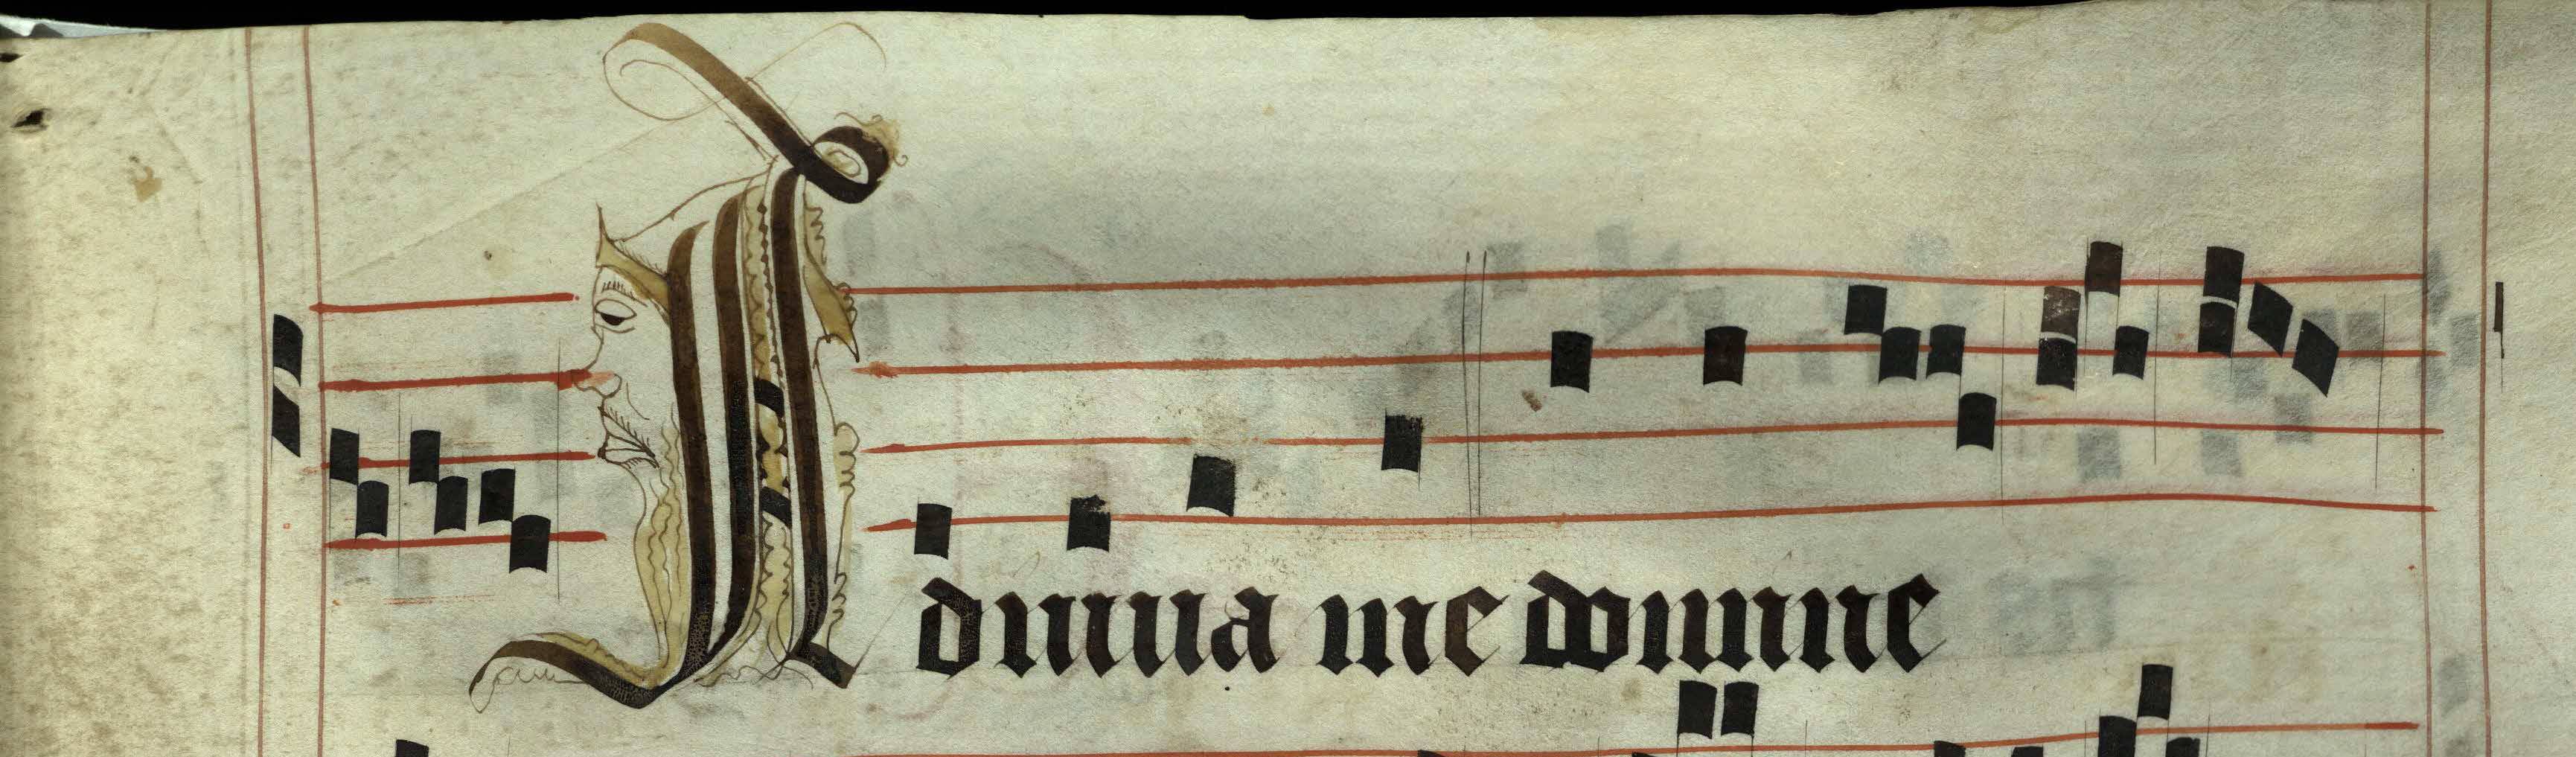 Pen decorated initial 'A' with face from p. 83 of a 15th century Gradual (St Andrews msM2148.G7)